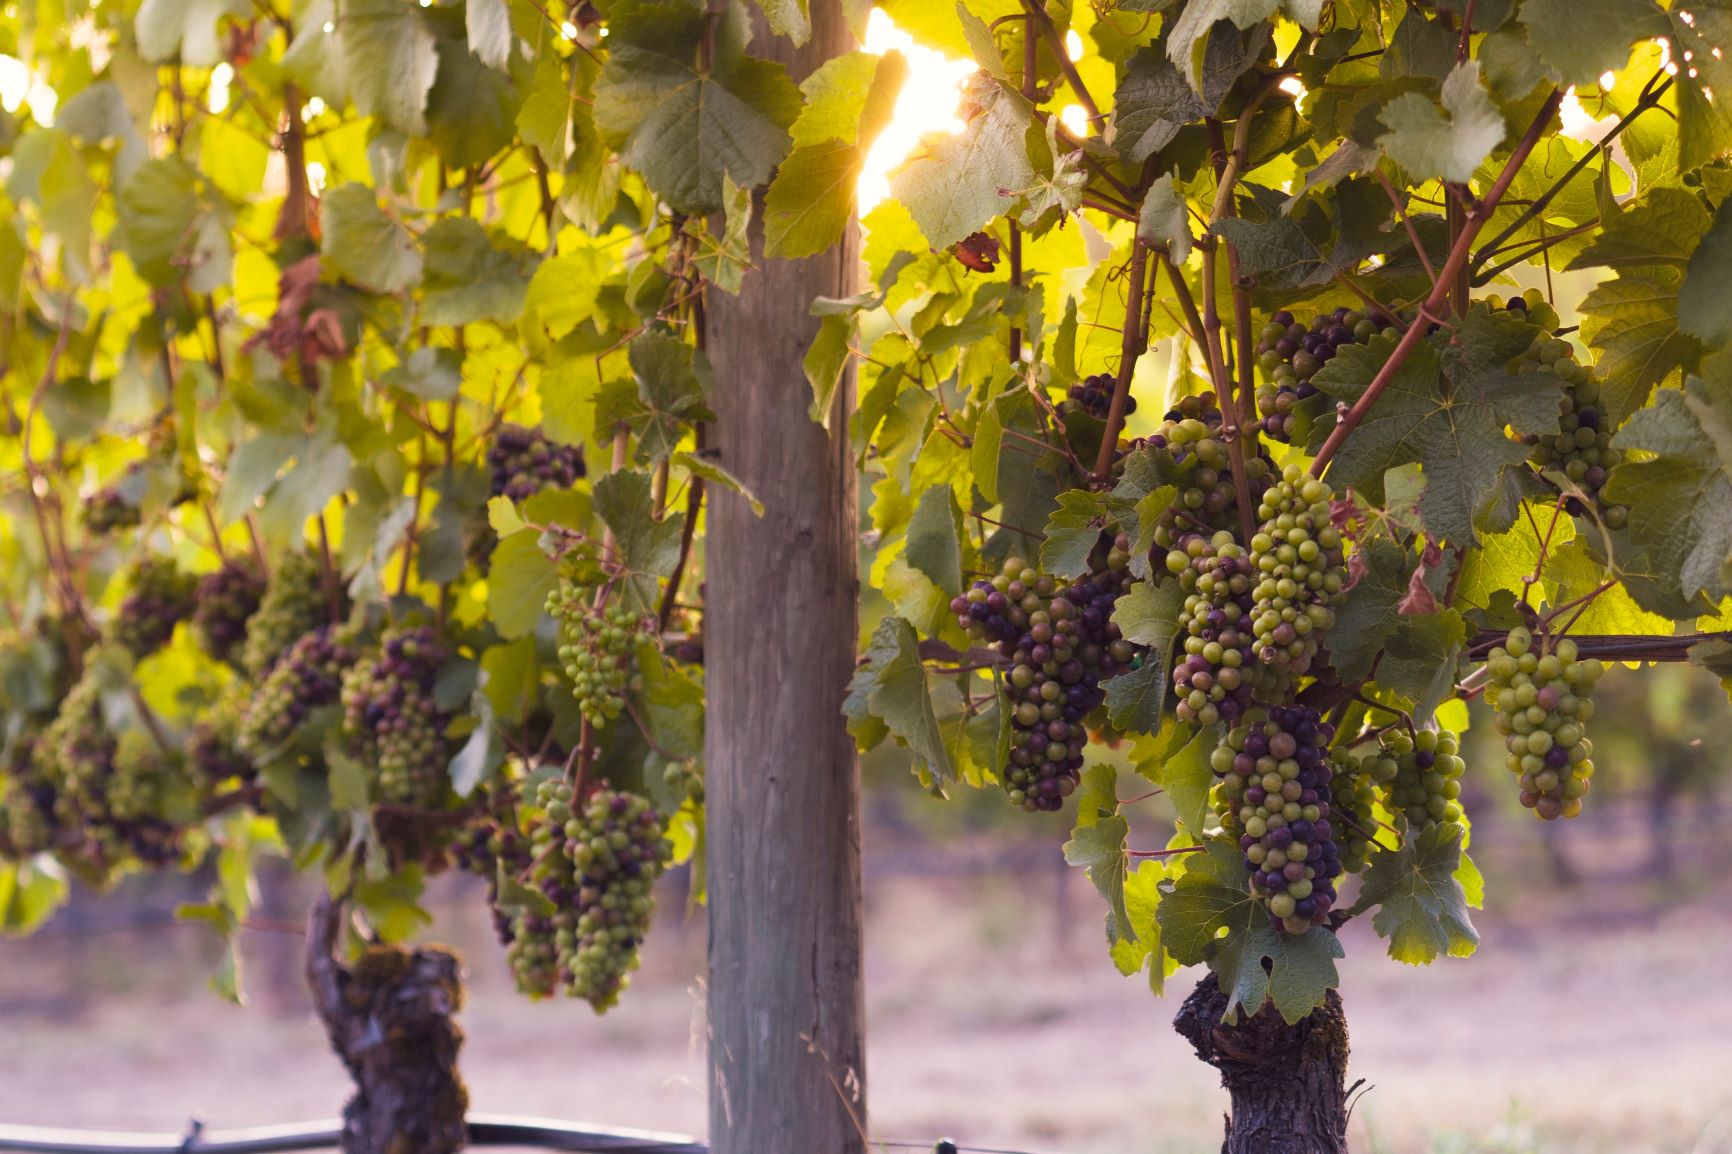 Grapes hanging from their vines